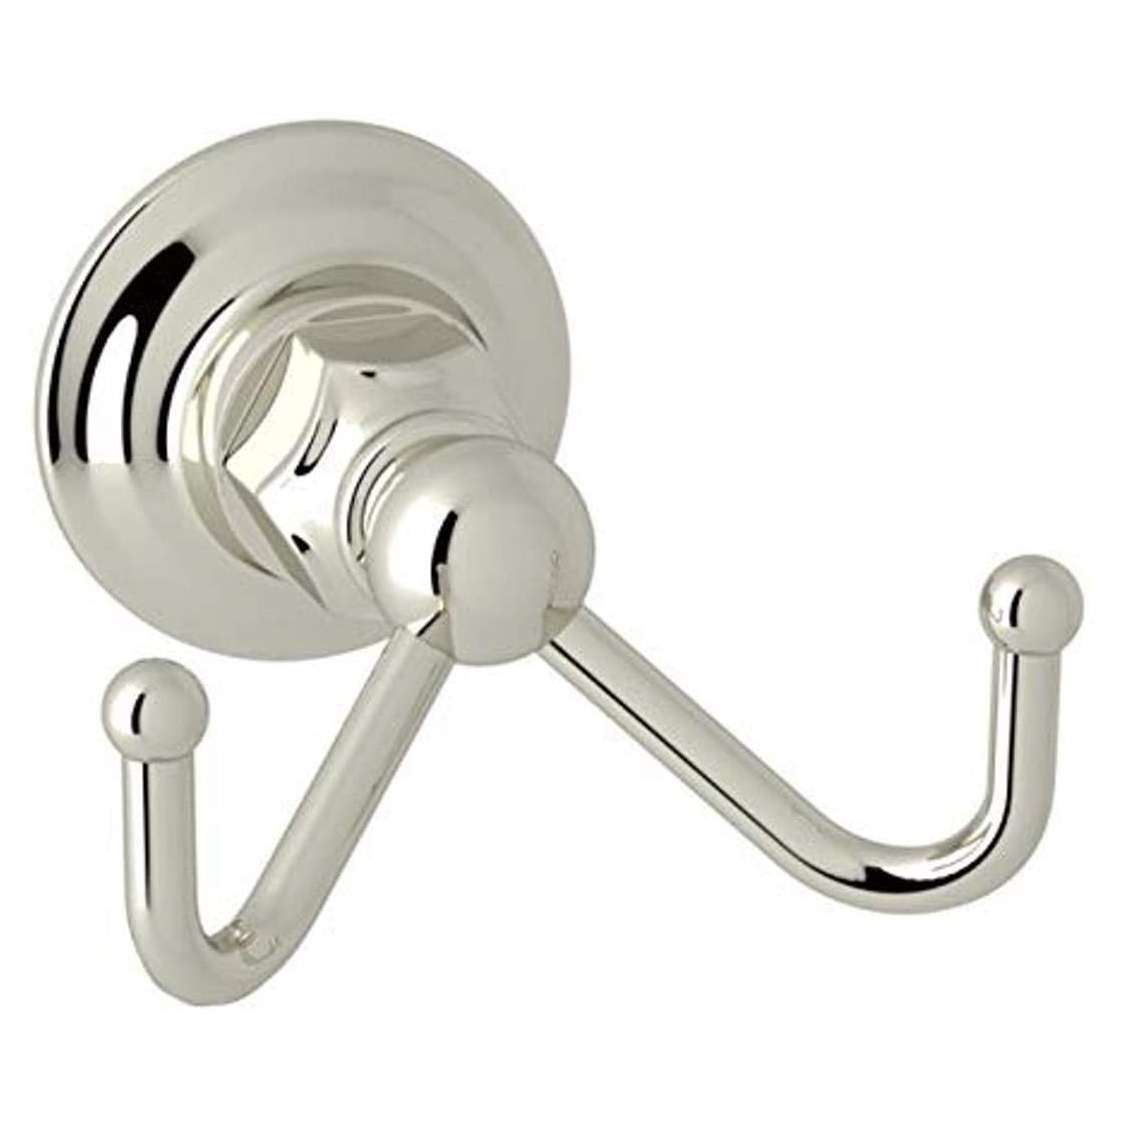 Country Bath Double Robe Hook in Polished Nickel